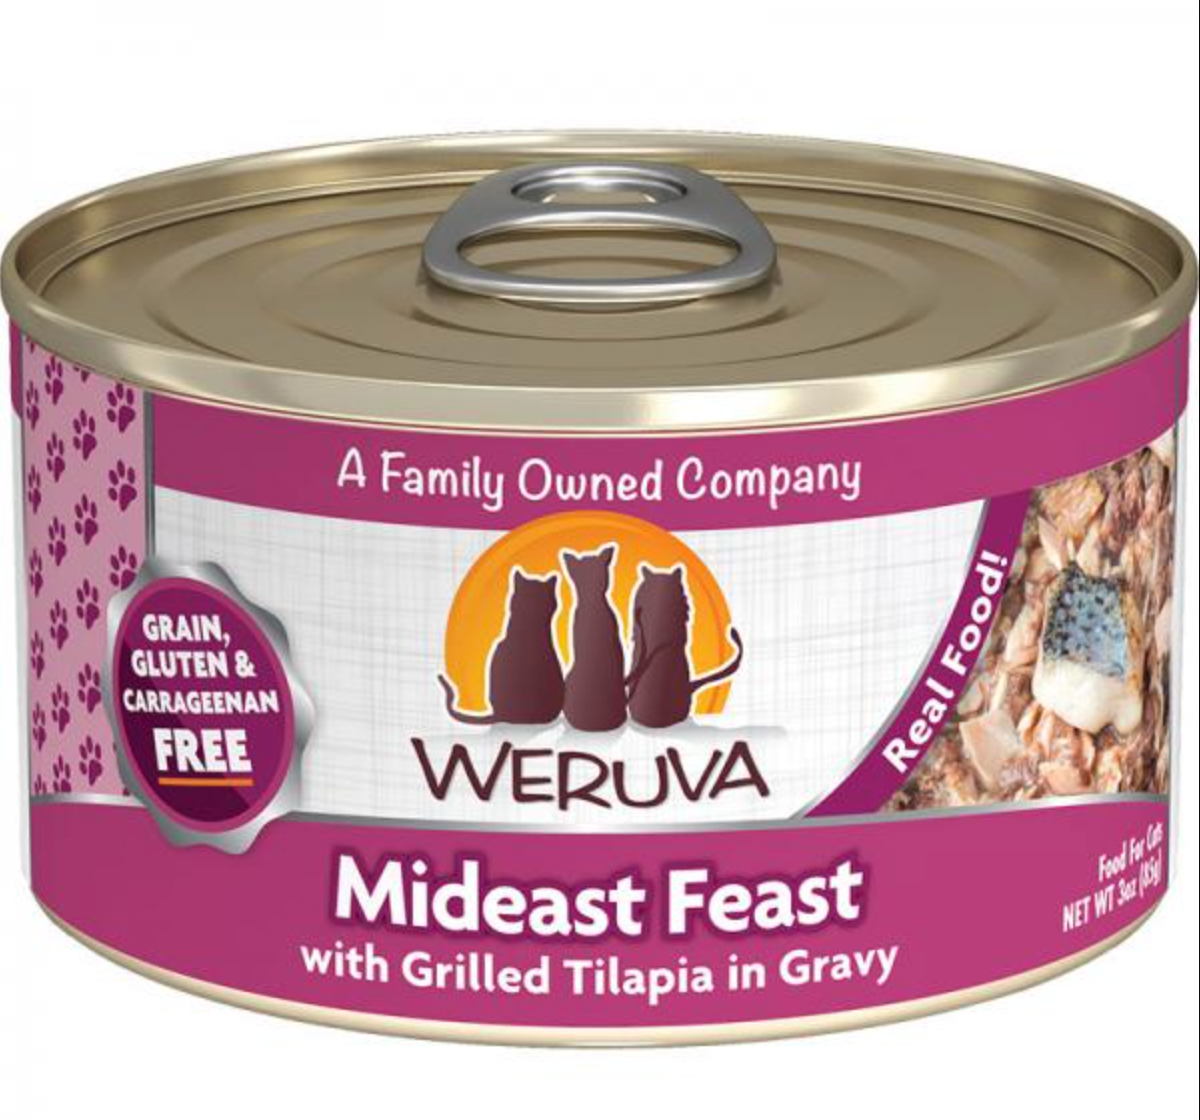 Weruva Mideast Feast Recipe Canned Cat Food with Grilled Tilapia in Gravy